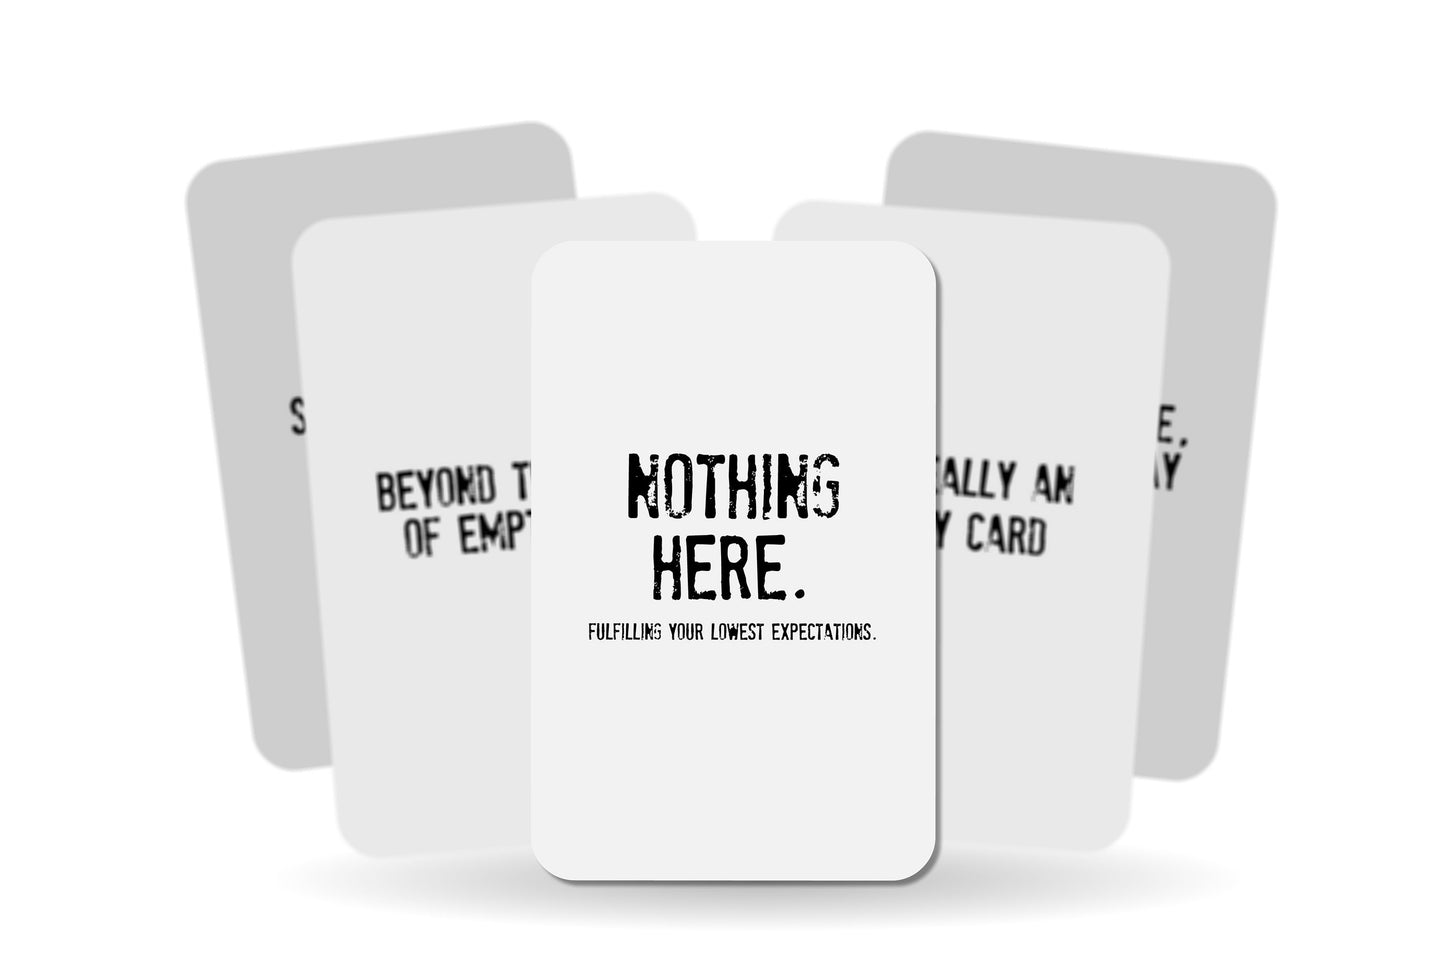 Nothing Here - Fulfilling Your Lowest Expectations - No Affirmations - 22 Cards